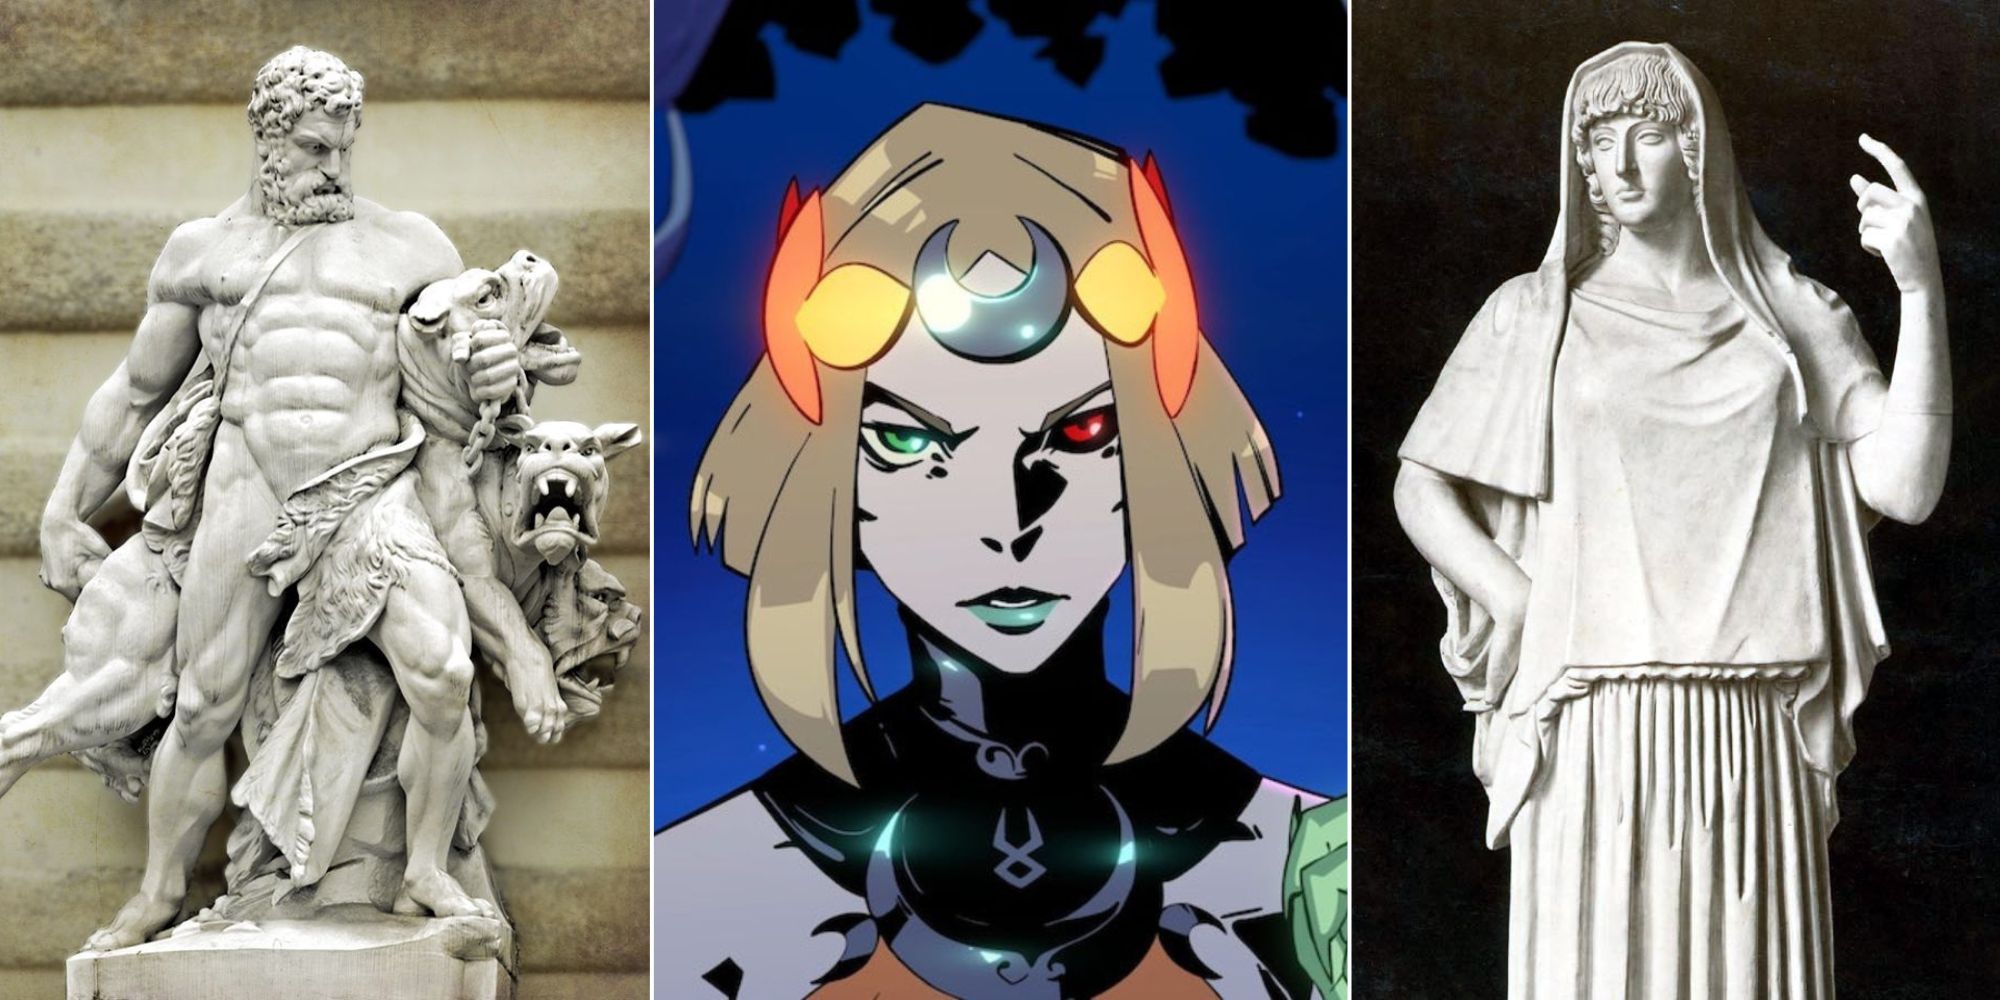 Split image of a heracles sculpture, melinoe from hades 2 and a hestia sculpture